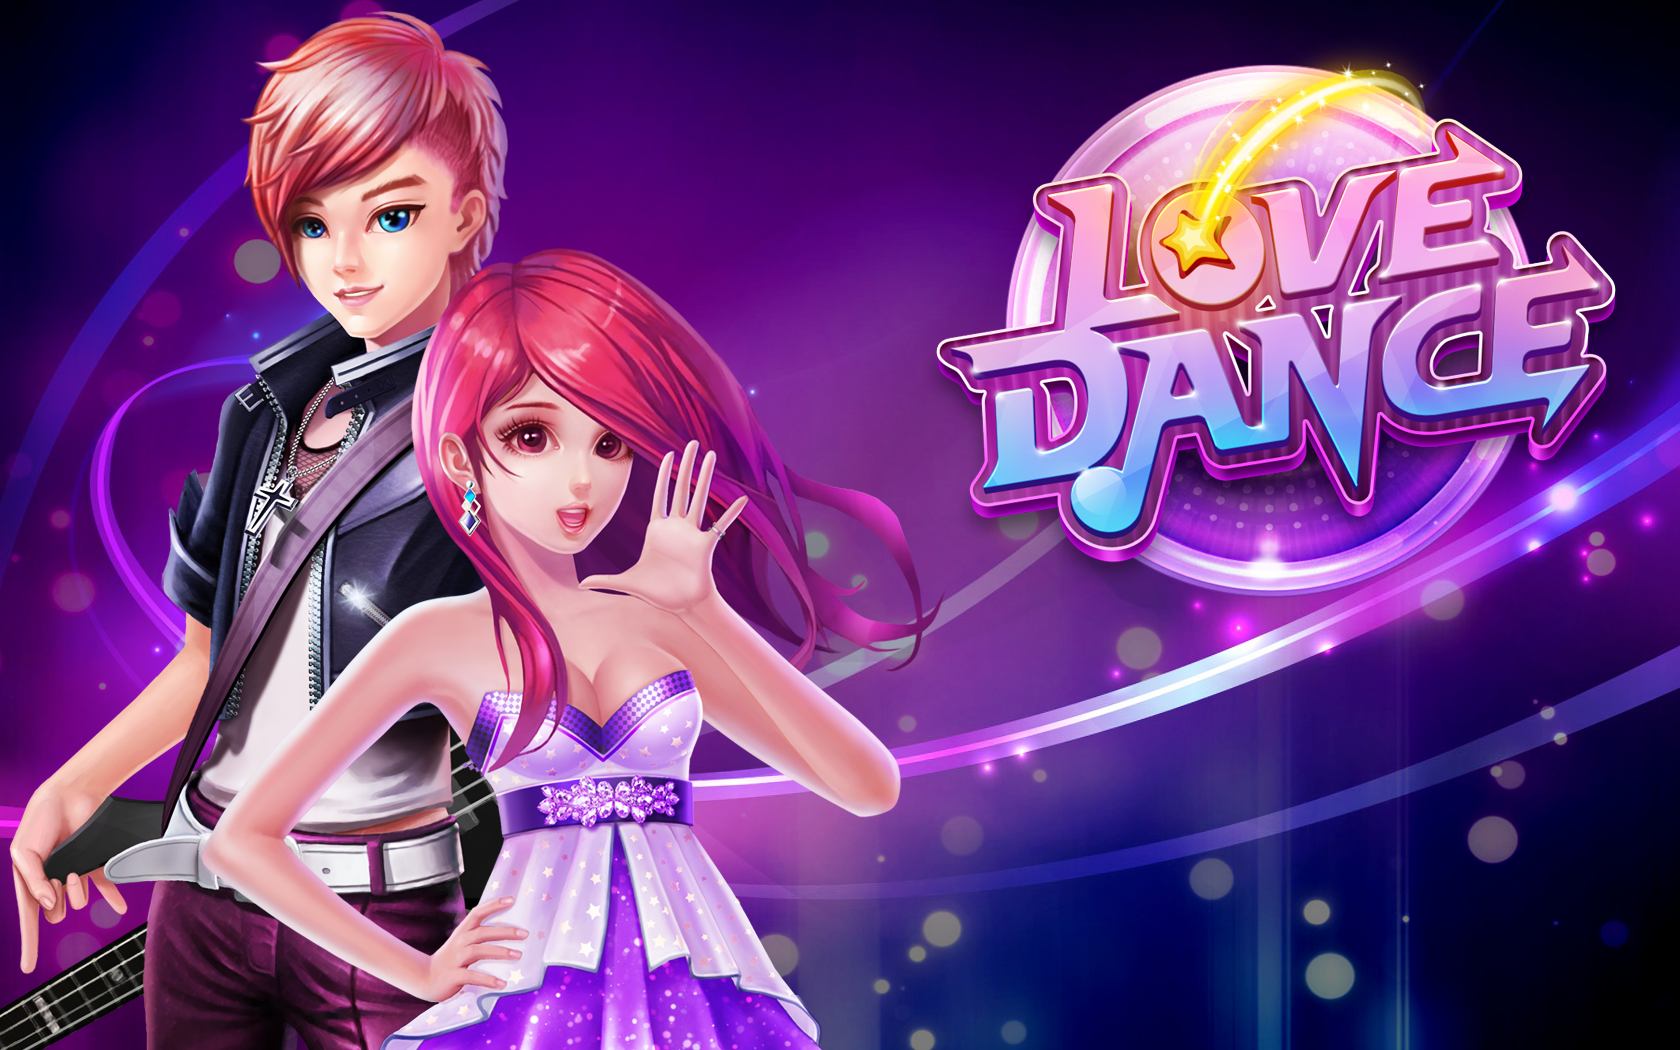 Super dancer online: meet your dance lover in this social game